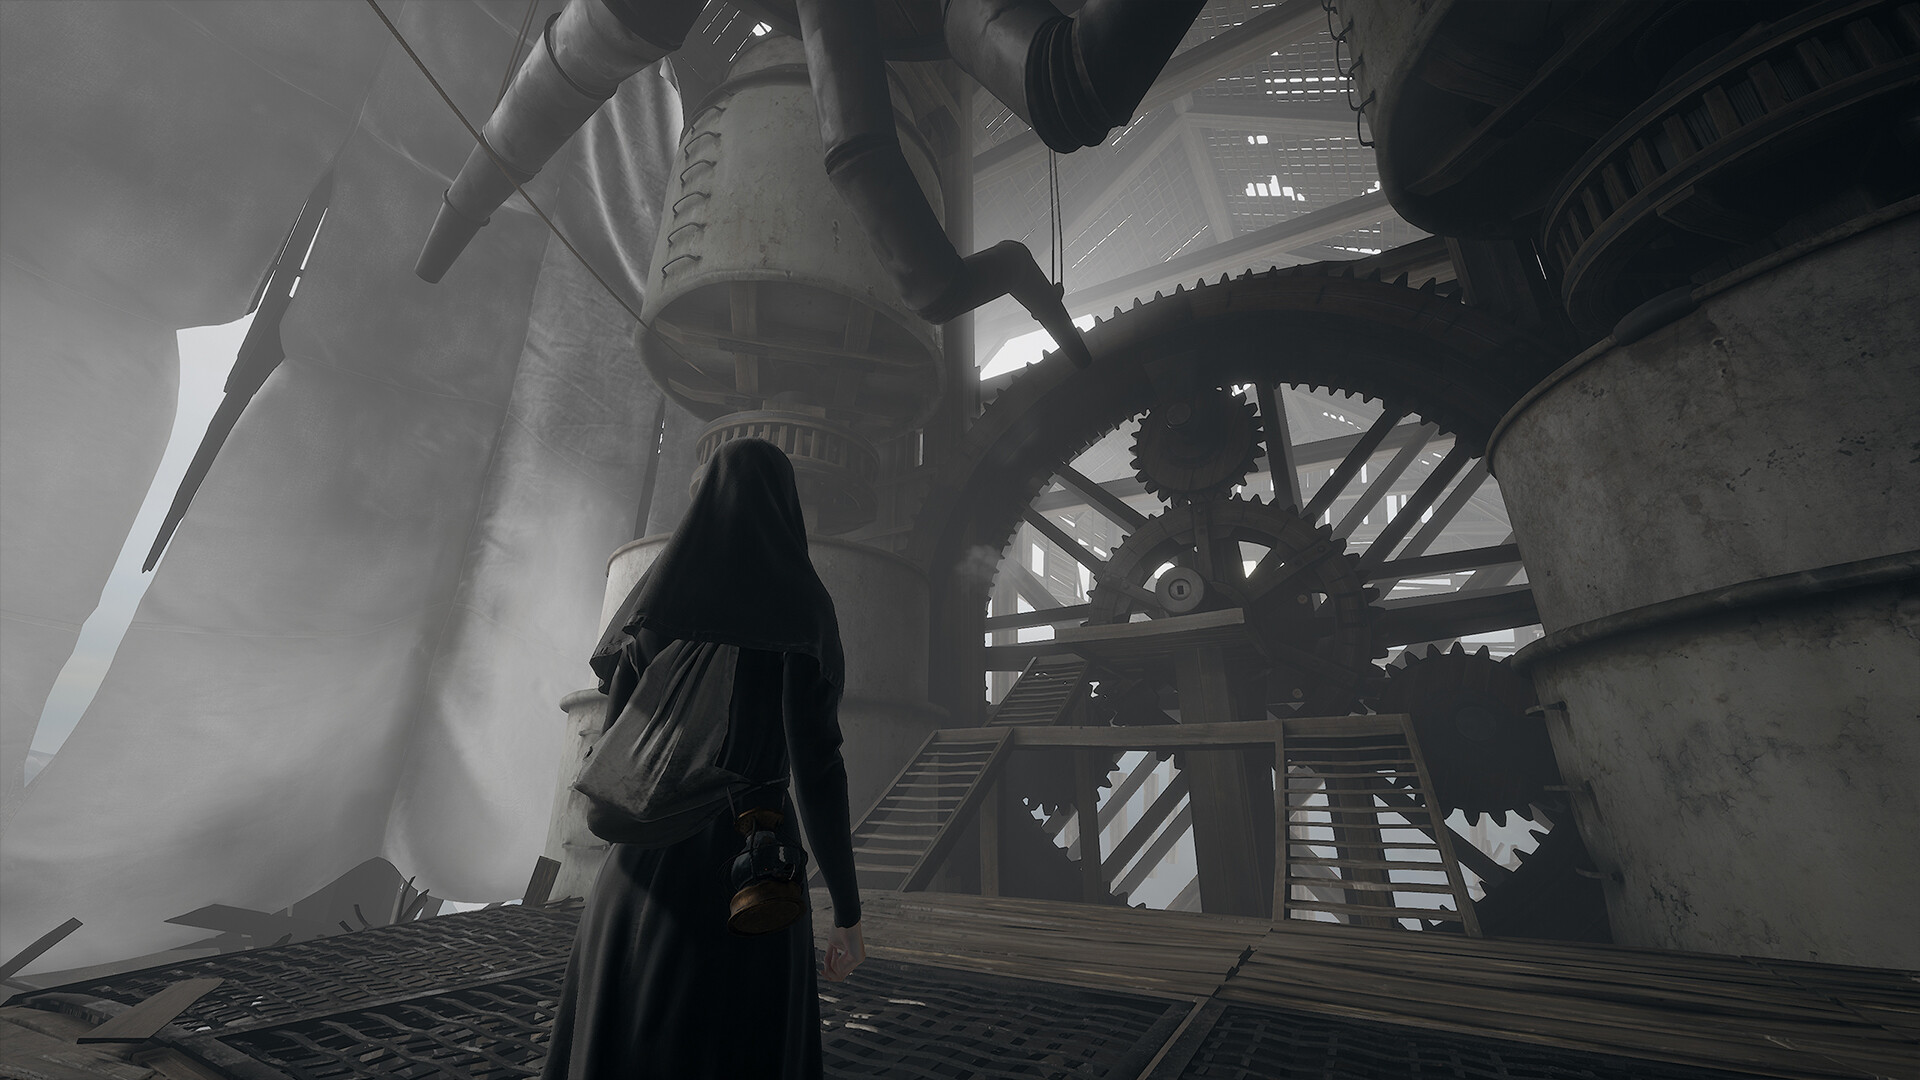 A screenshot from the game "Indika:" a nun in a black habit stands in front of tall mechanical gears